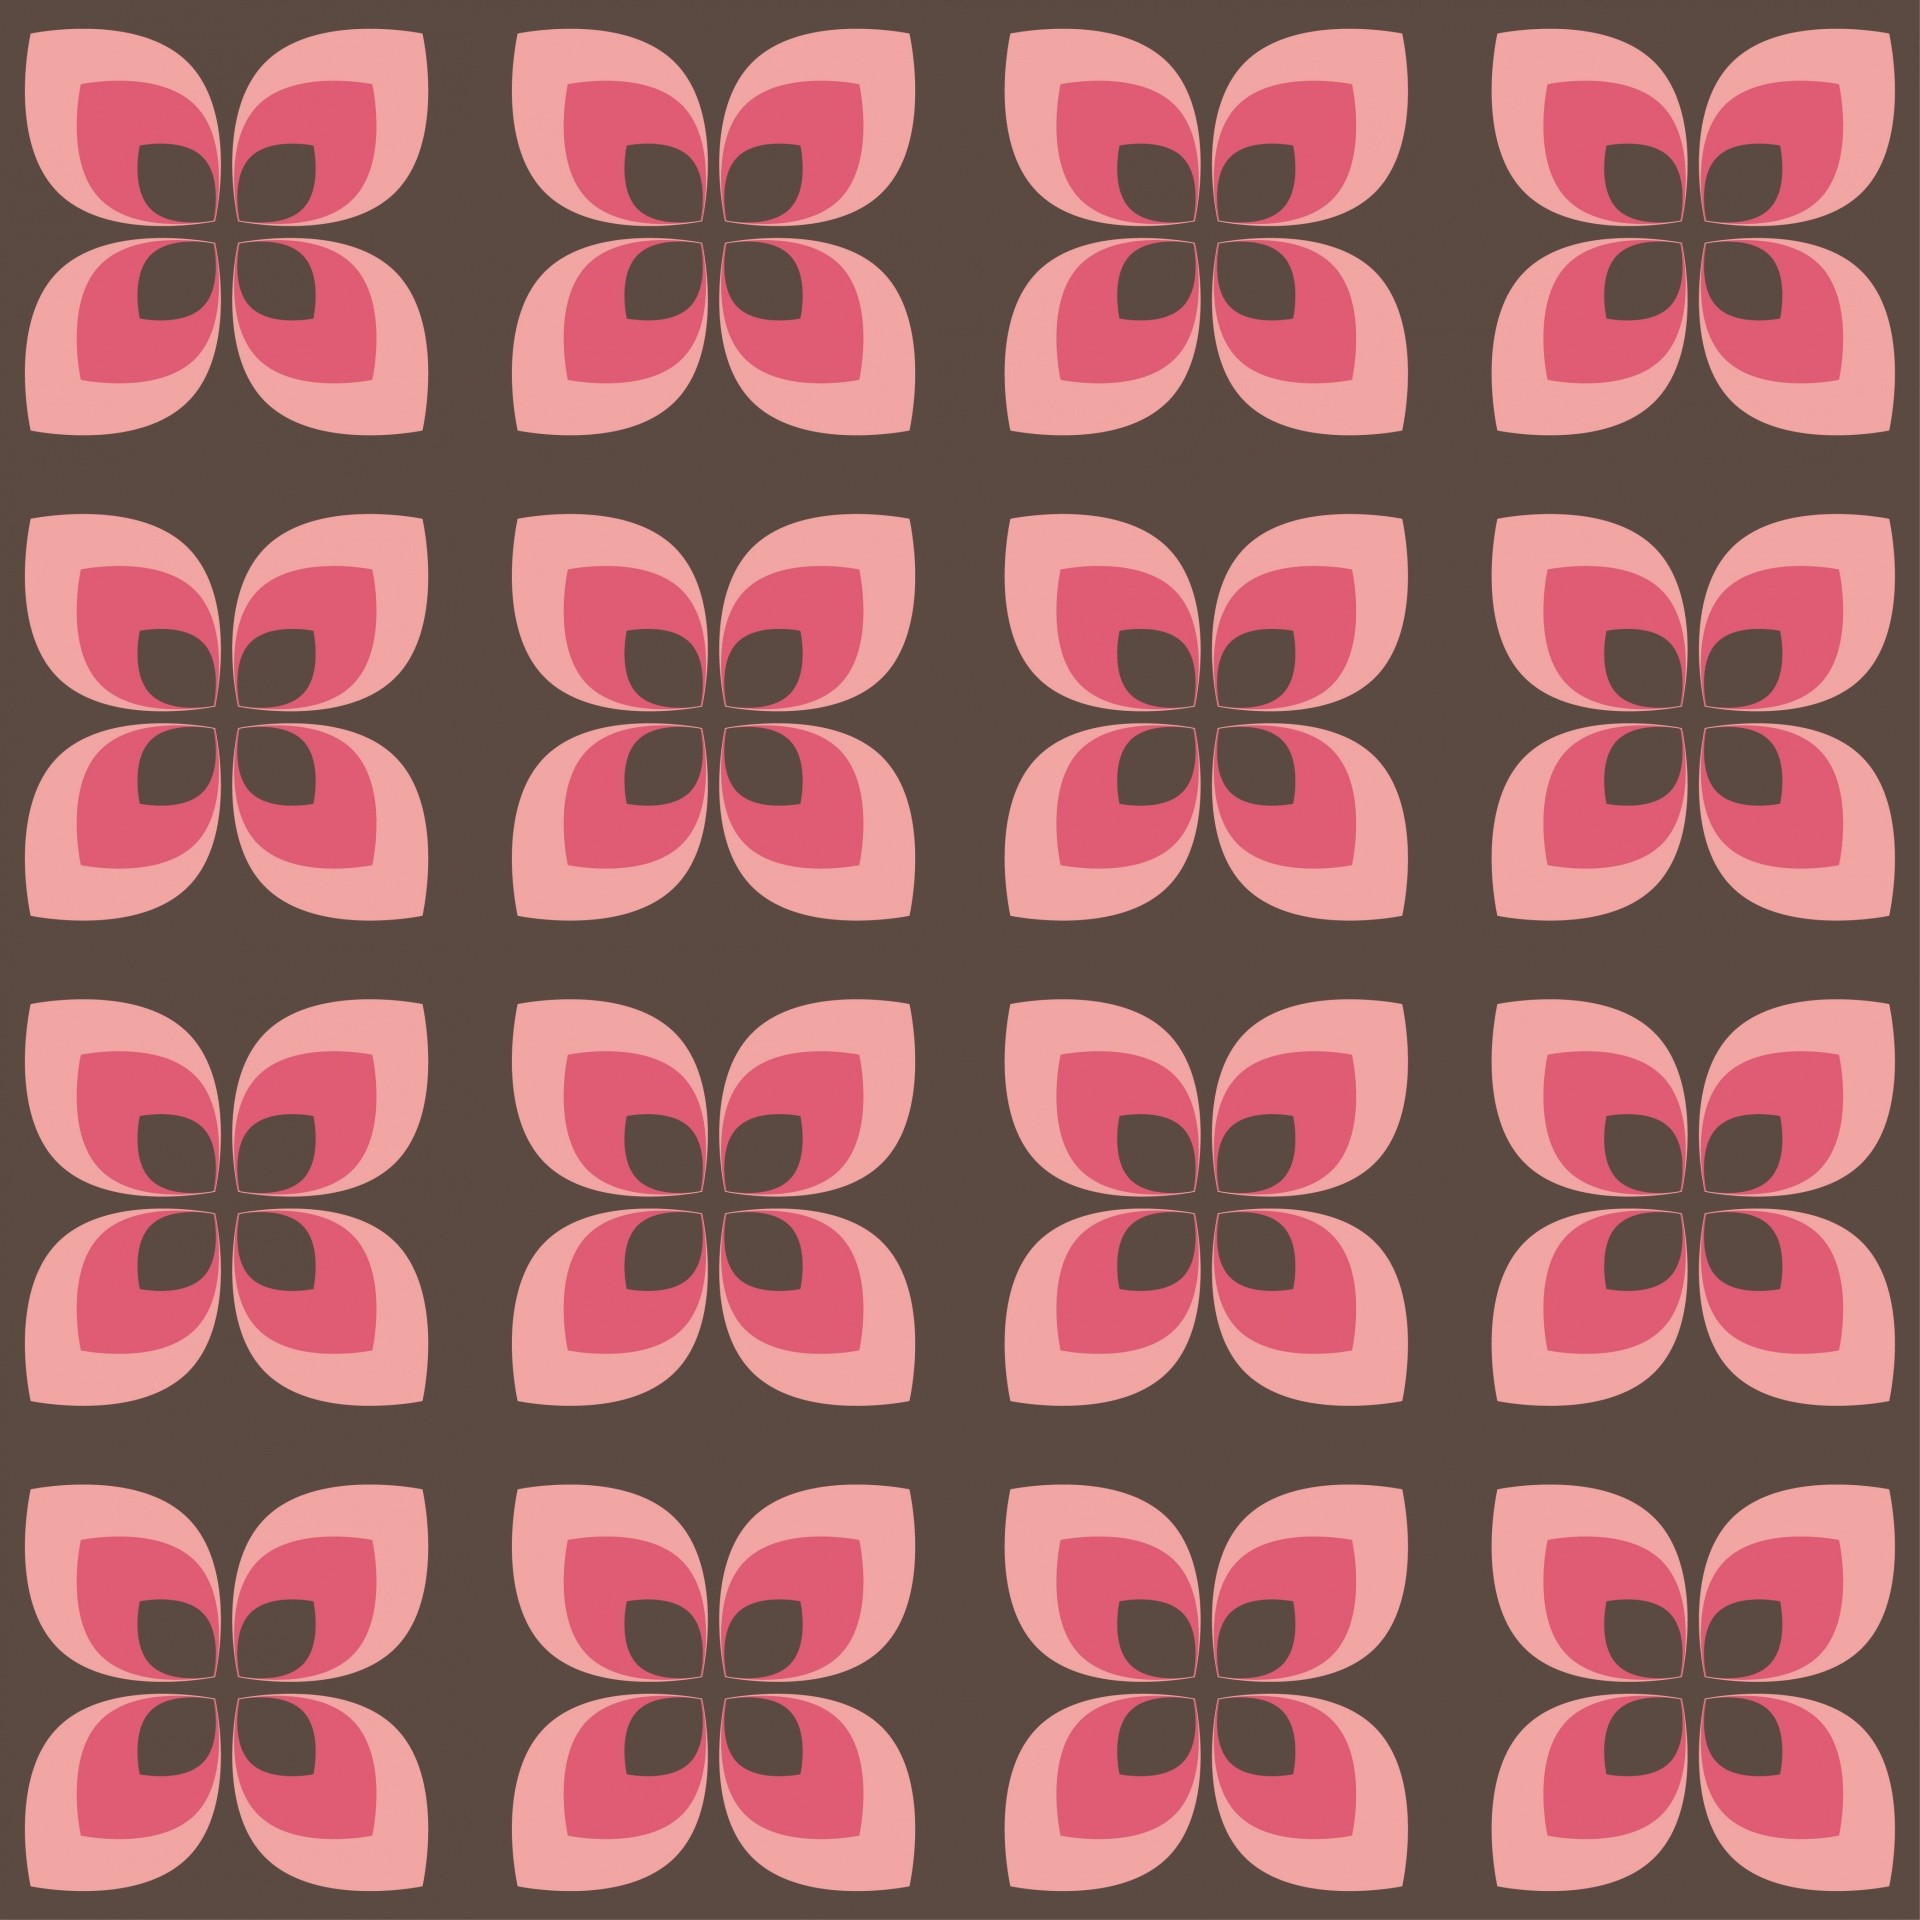 Background Pattern Pink And White Colors Retro Seamless Wallpaper Texture  Floral Pattern For Fabric Tile Interior Design Or Wallpaper Background  Vector Image Stock Illustration  Download Image Now  iStock